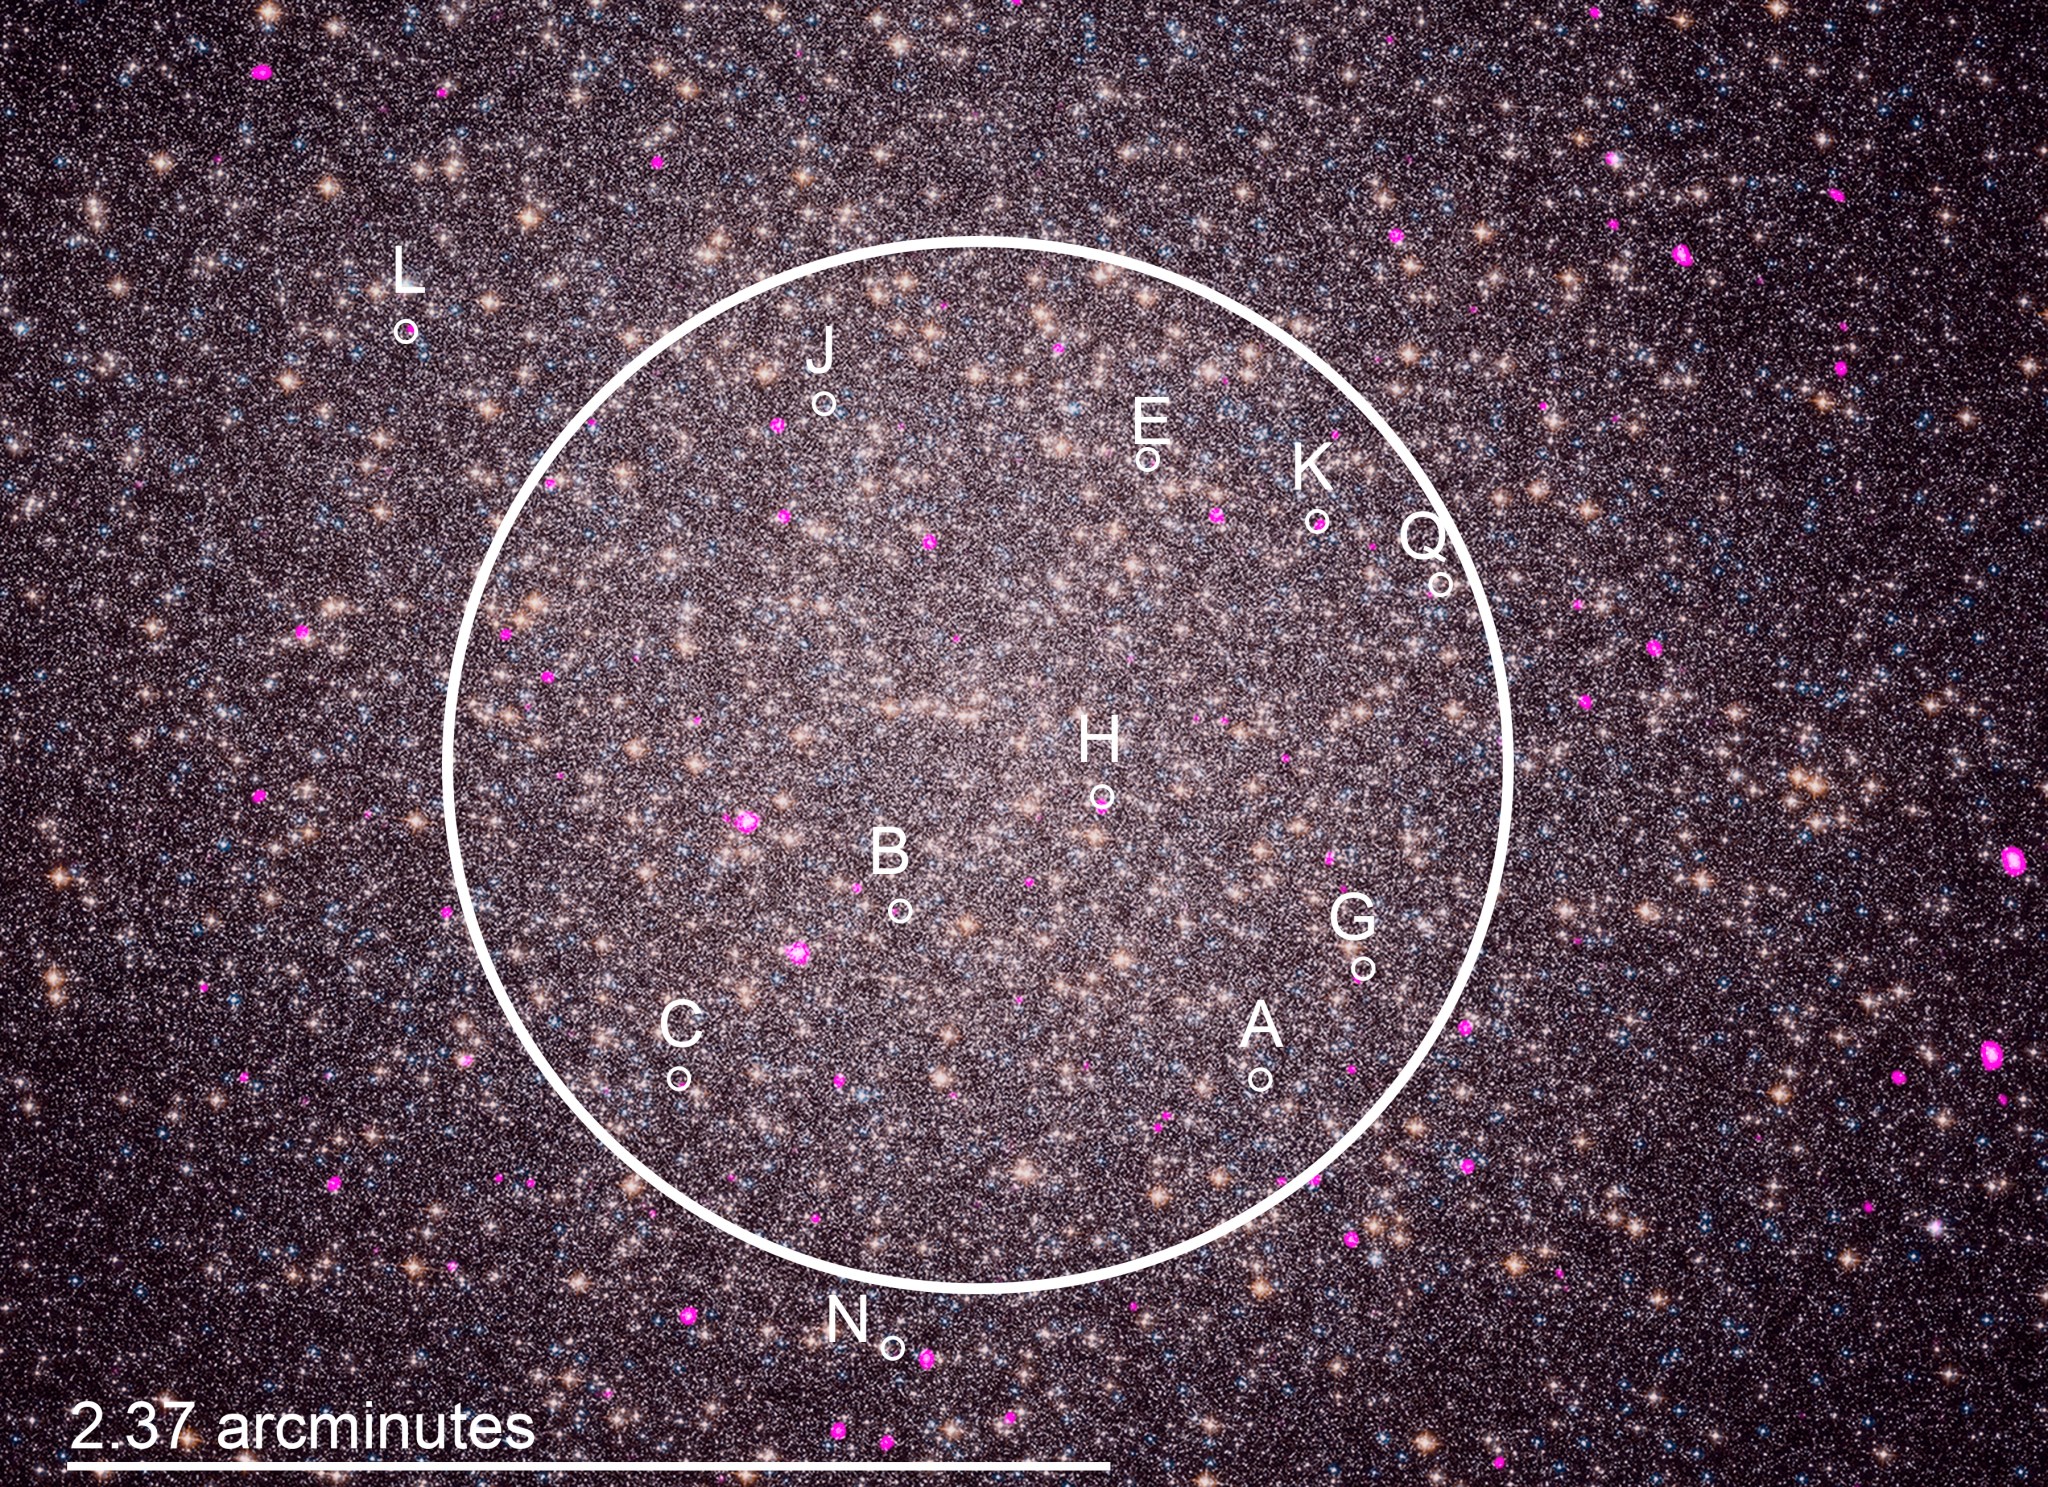 A close-up image of Omega Centauri, in X-ray & optical light, shows the locations of some of the spider pulsars. Spider pulsars are a special class of millisecond pulsars, and get their name for the damage they inflict on small companion stars in orbit around them.